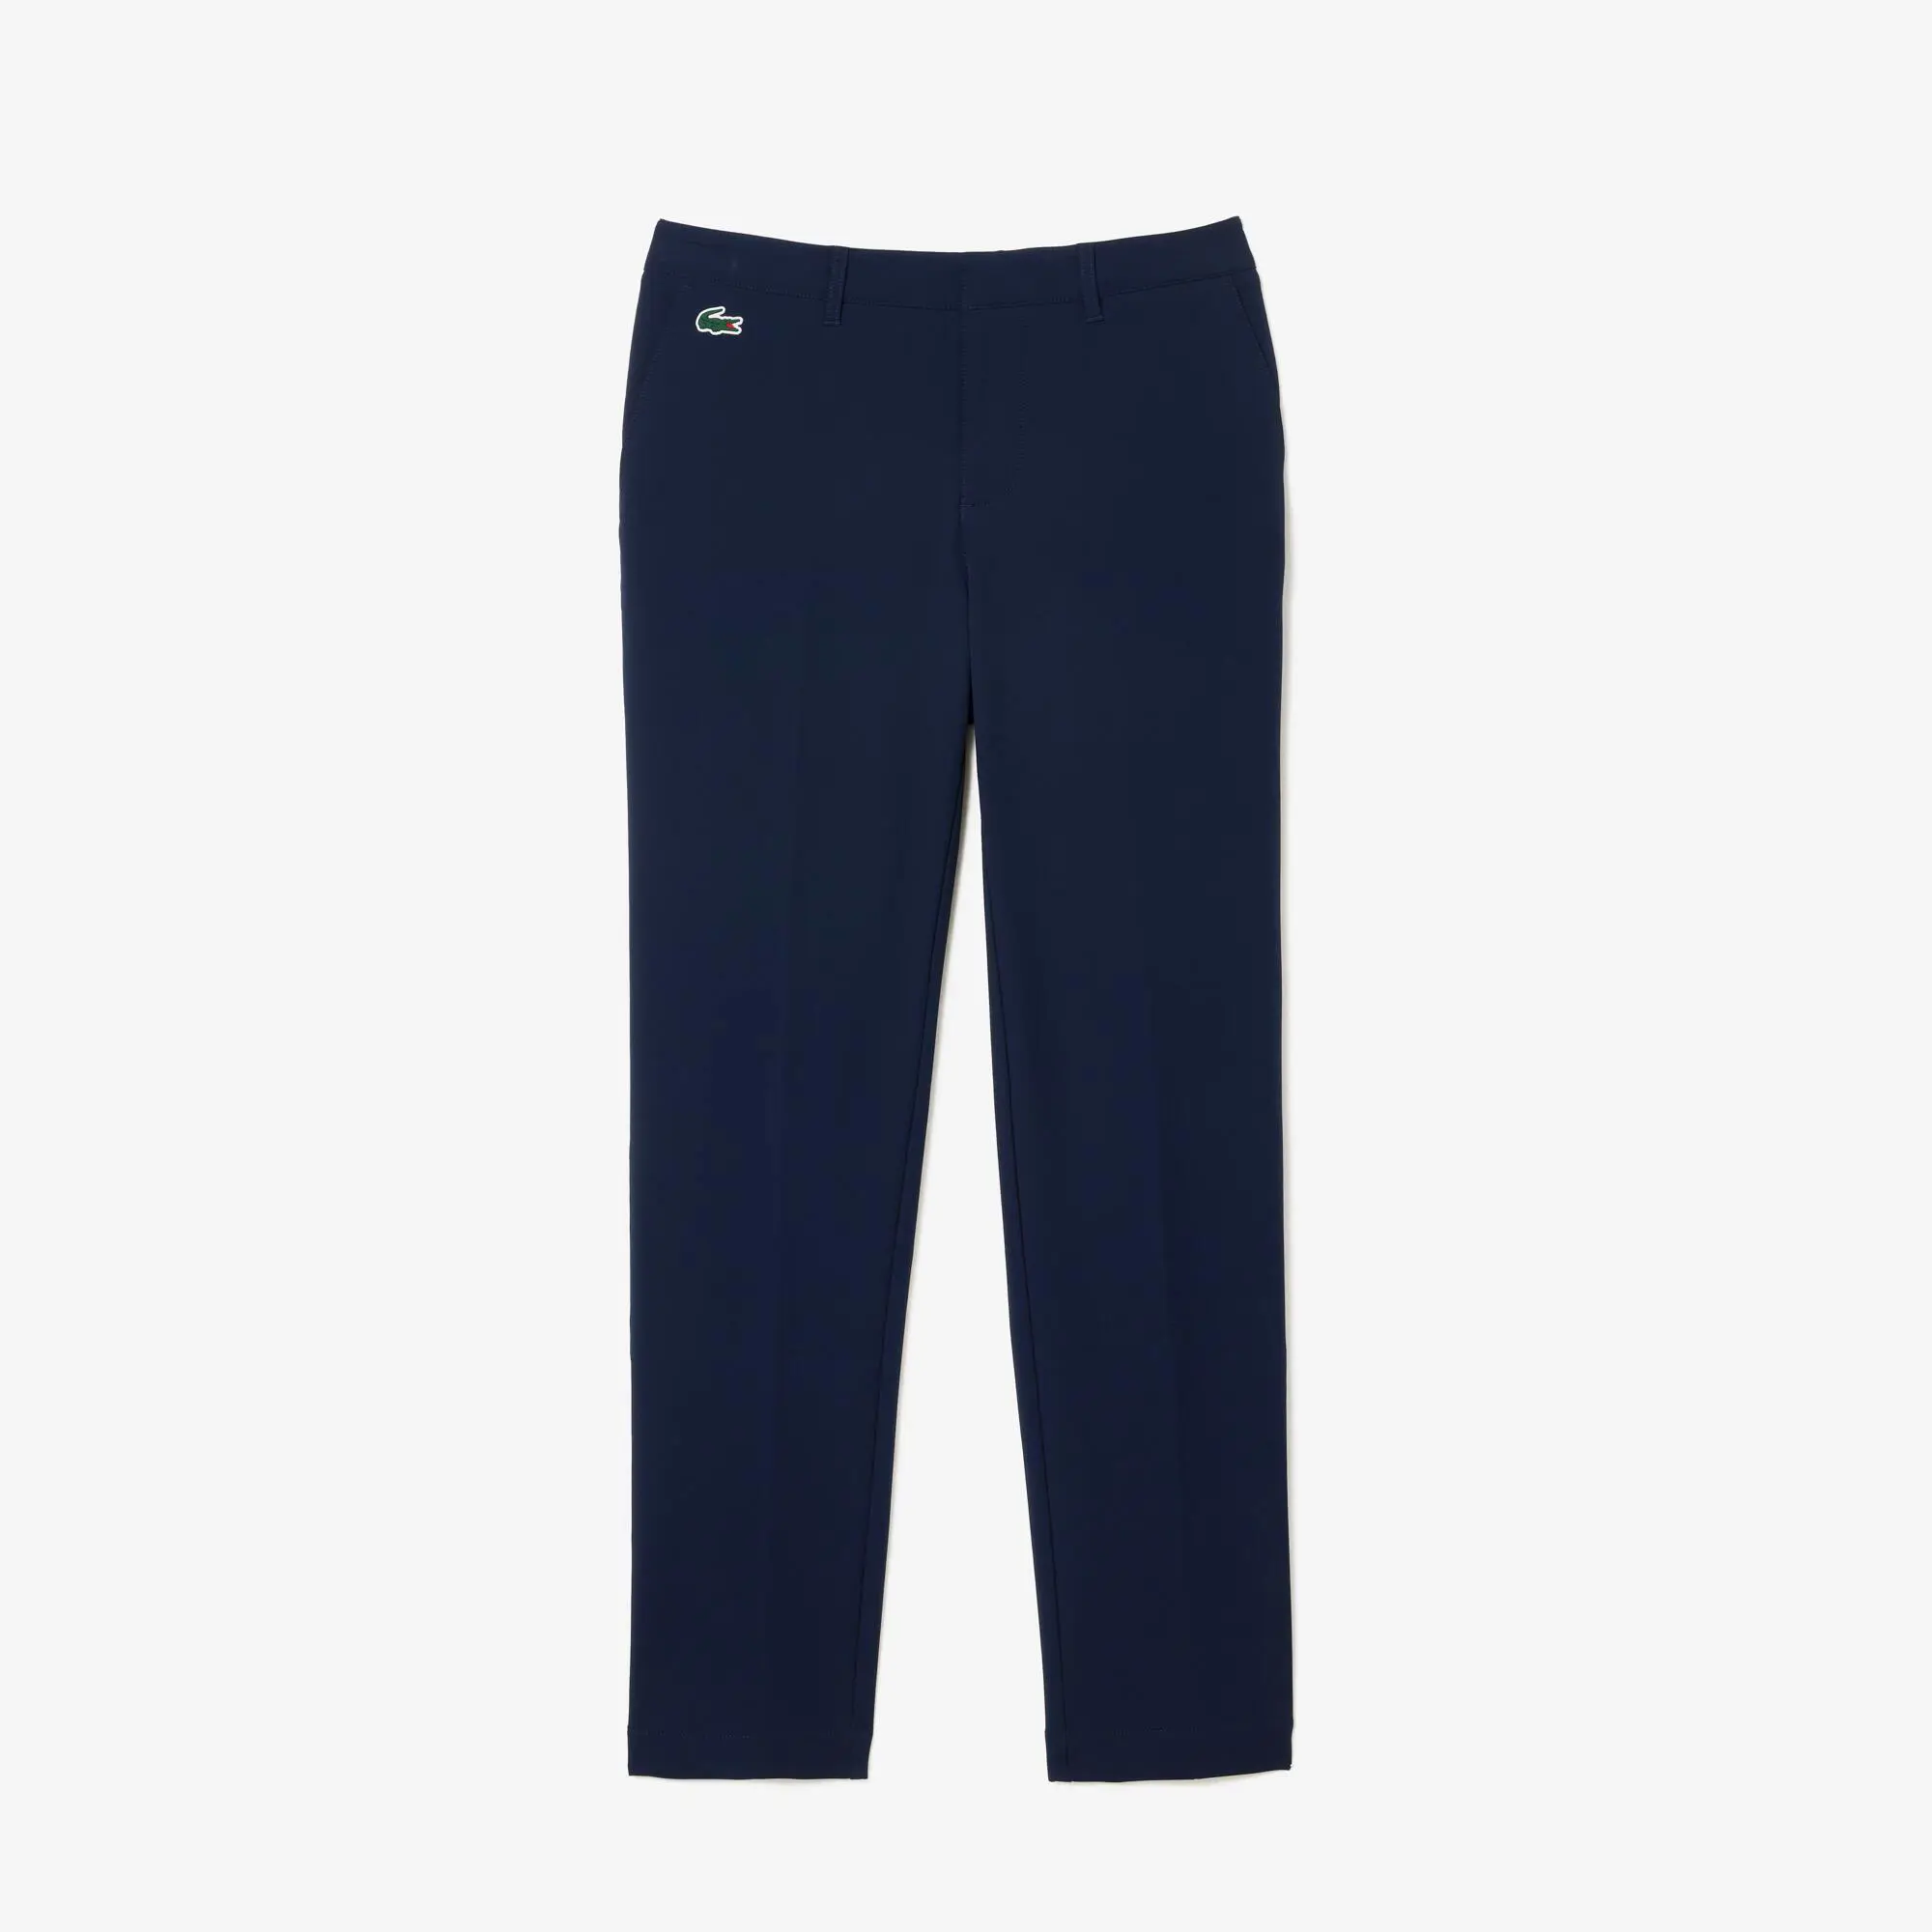 Lacoste Insulating Water Repellant Golf Pants. 2